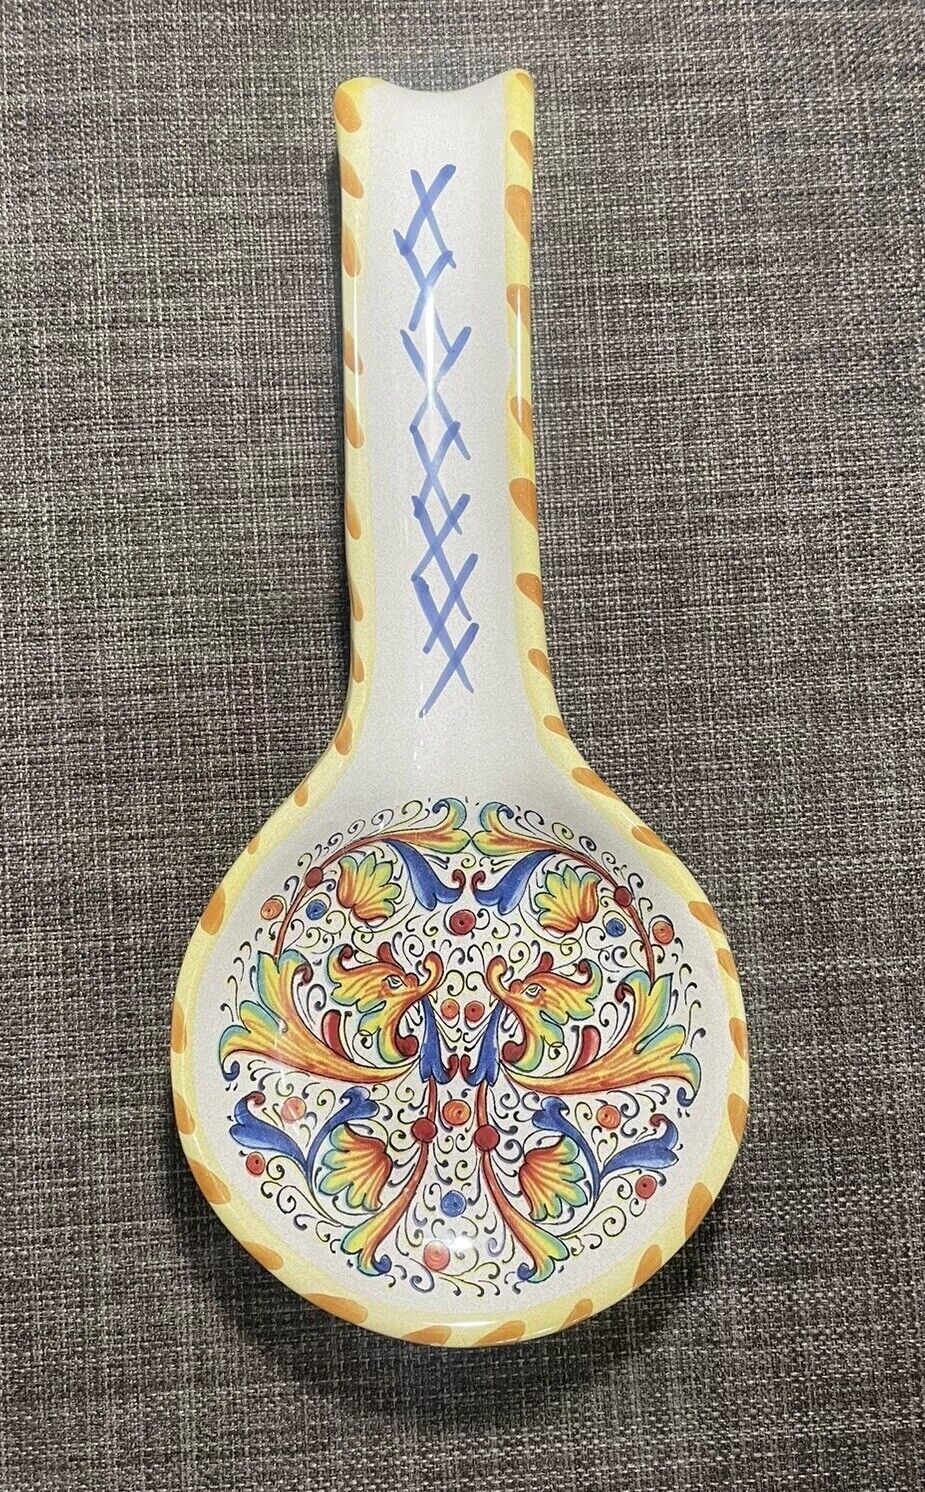 Vintage Meridiana Ceramiche Spoon Rest Italy Ceramic Hand Painted